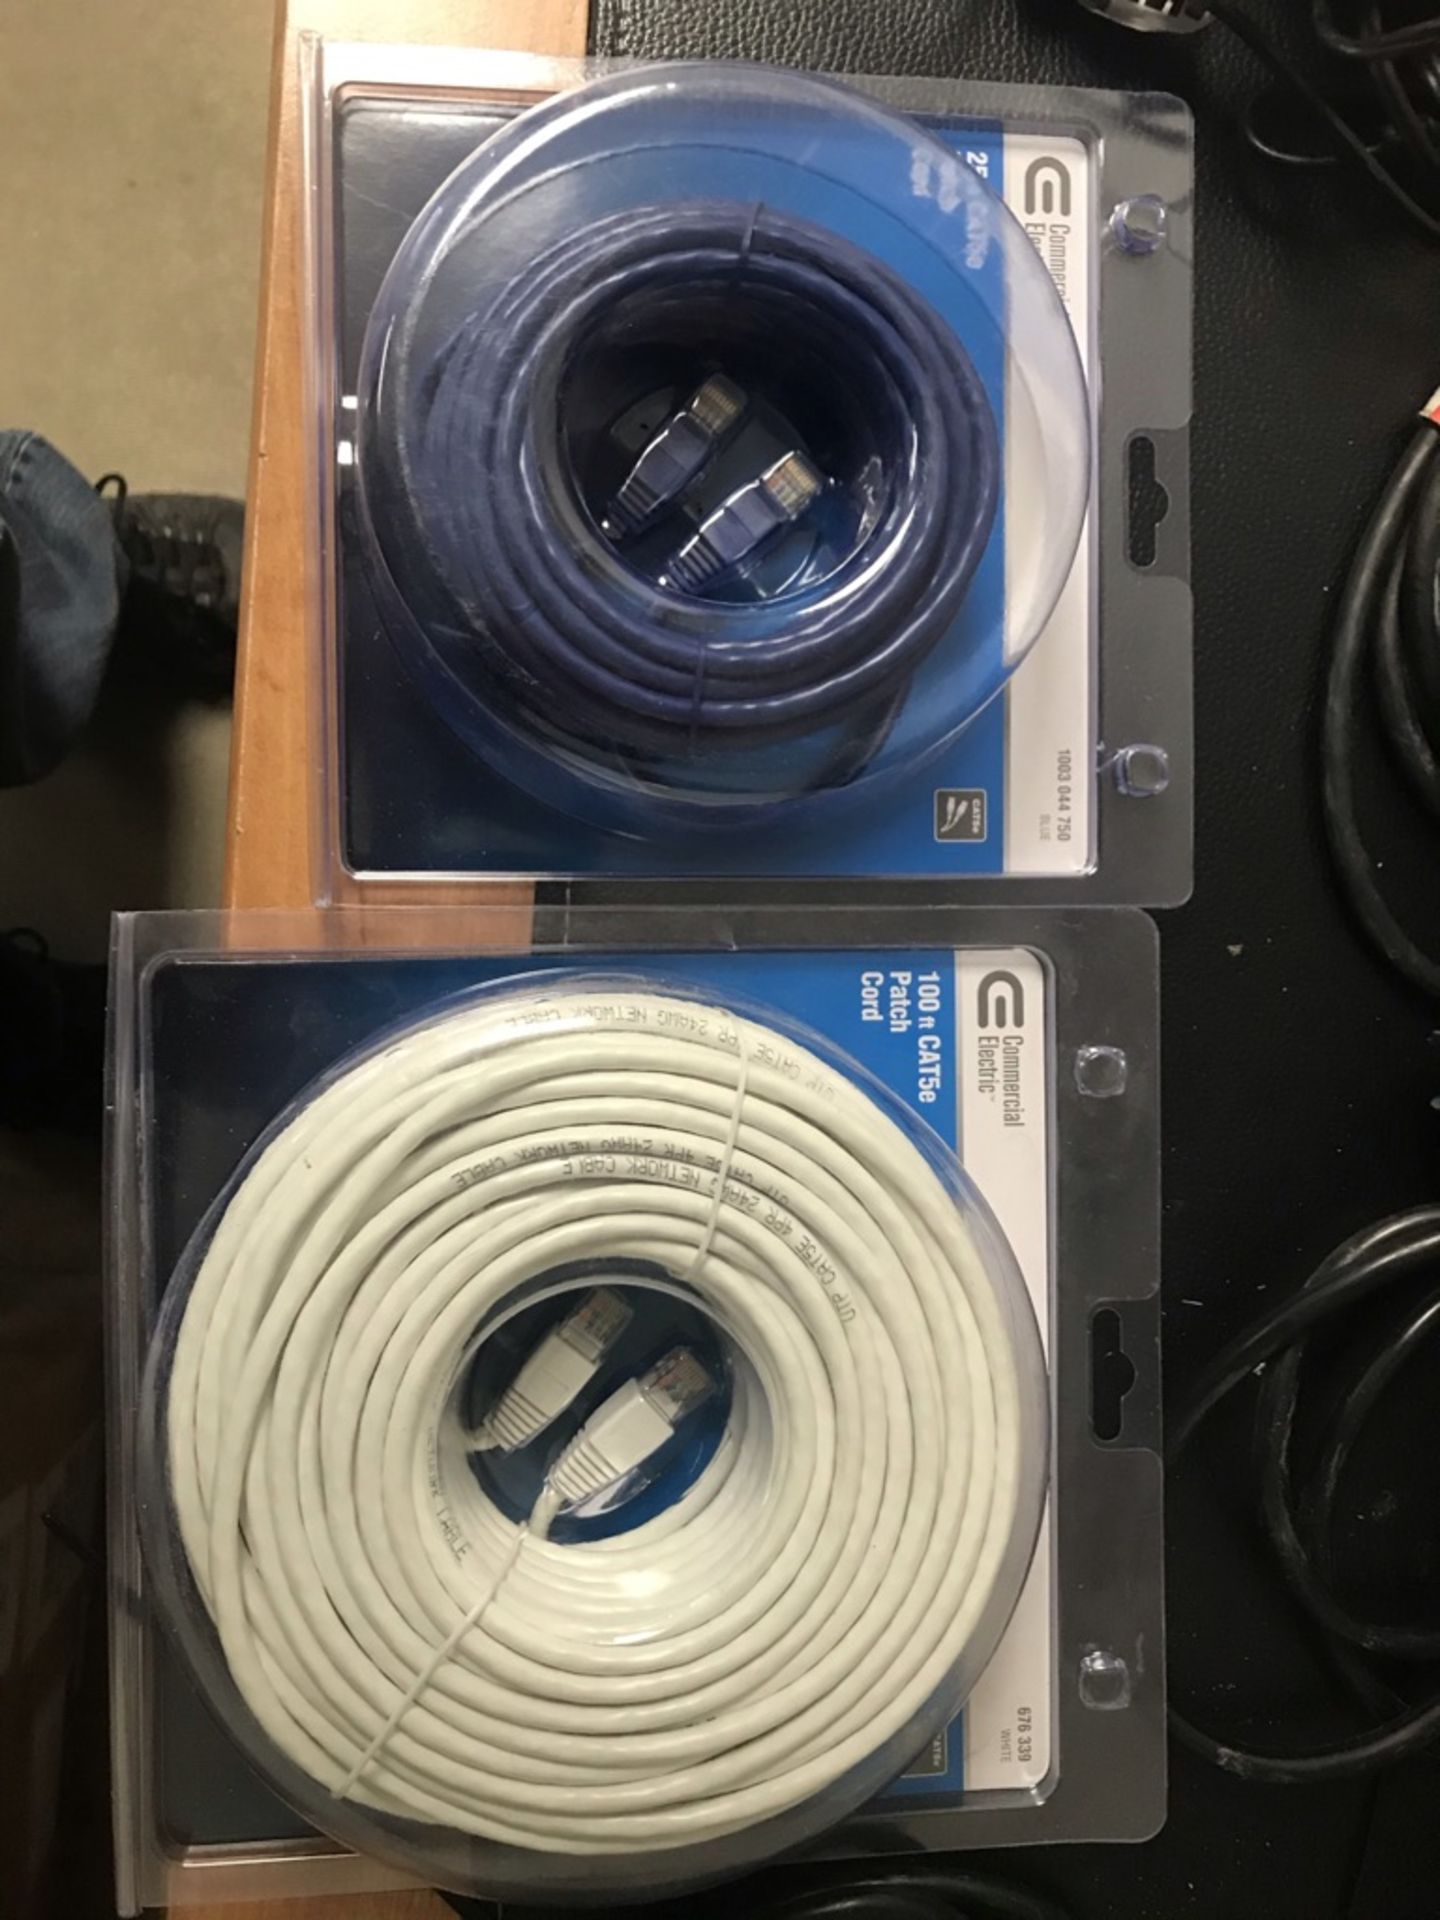 LOT OF: (1) 25' CAT 5E CORD AND (1) 100' CAT 5E CORD - Image 2 of 4